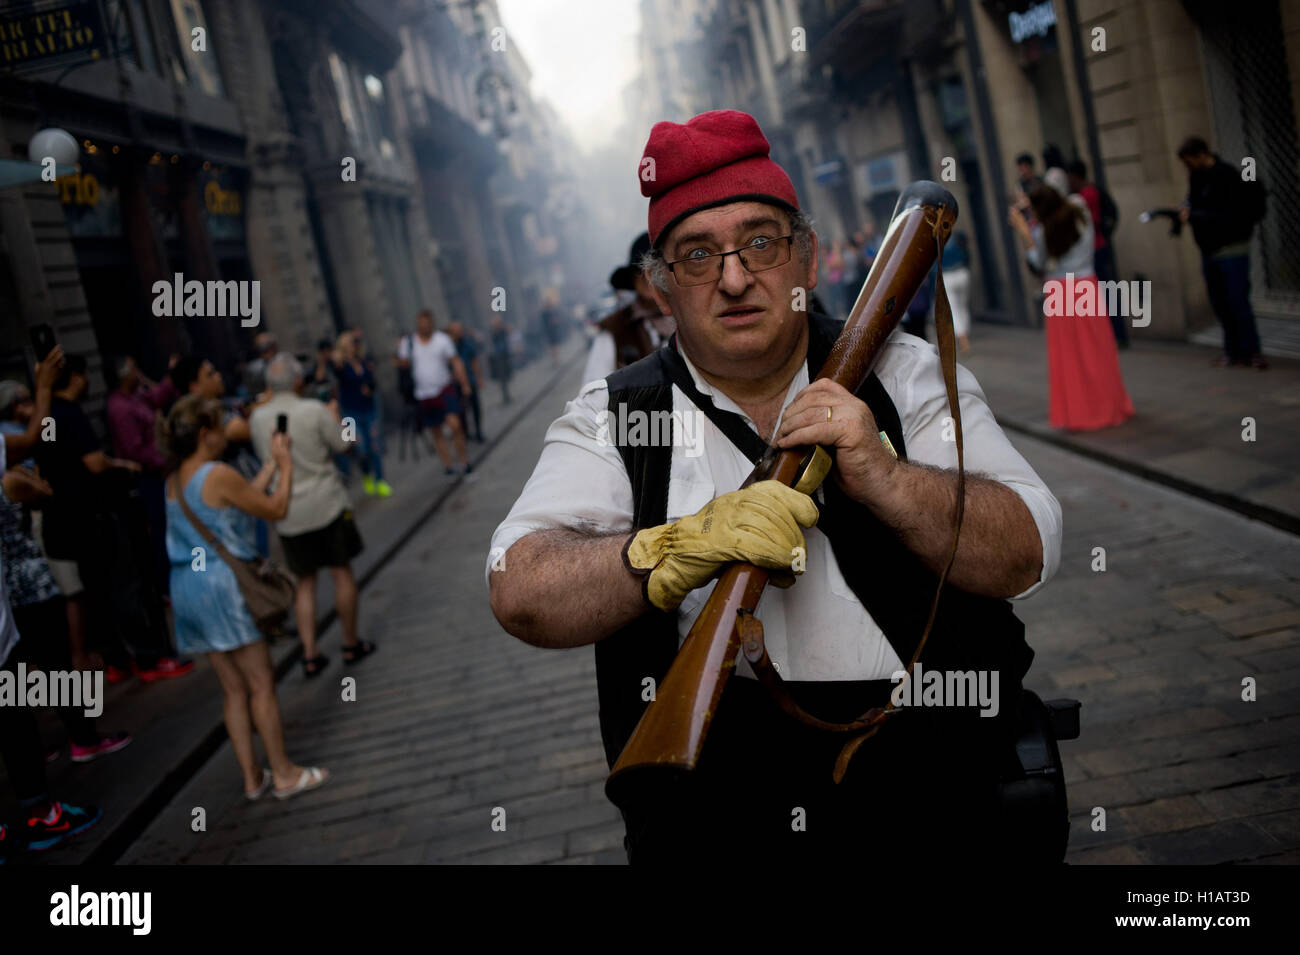 Barcelona, Catalonia, Spain. 24th Sep, 2016. A trabucaire through the streets of Barcelona early in the morning on the occasion of the celebrations of the Merce Festival (Festes de la Merce). The Galejada Trabucaire marks the beginning of the day of the patron saint of Barcelona, La Merce. Men and women dressed as ancient Catalan bandits take to the streets of the old part of Barcelona and cause a loud noise with his blunderbusses full of gunpowder. © Jordi Boixareu/ZUMA Wire/Alamy Live News Stock Photo